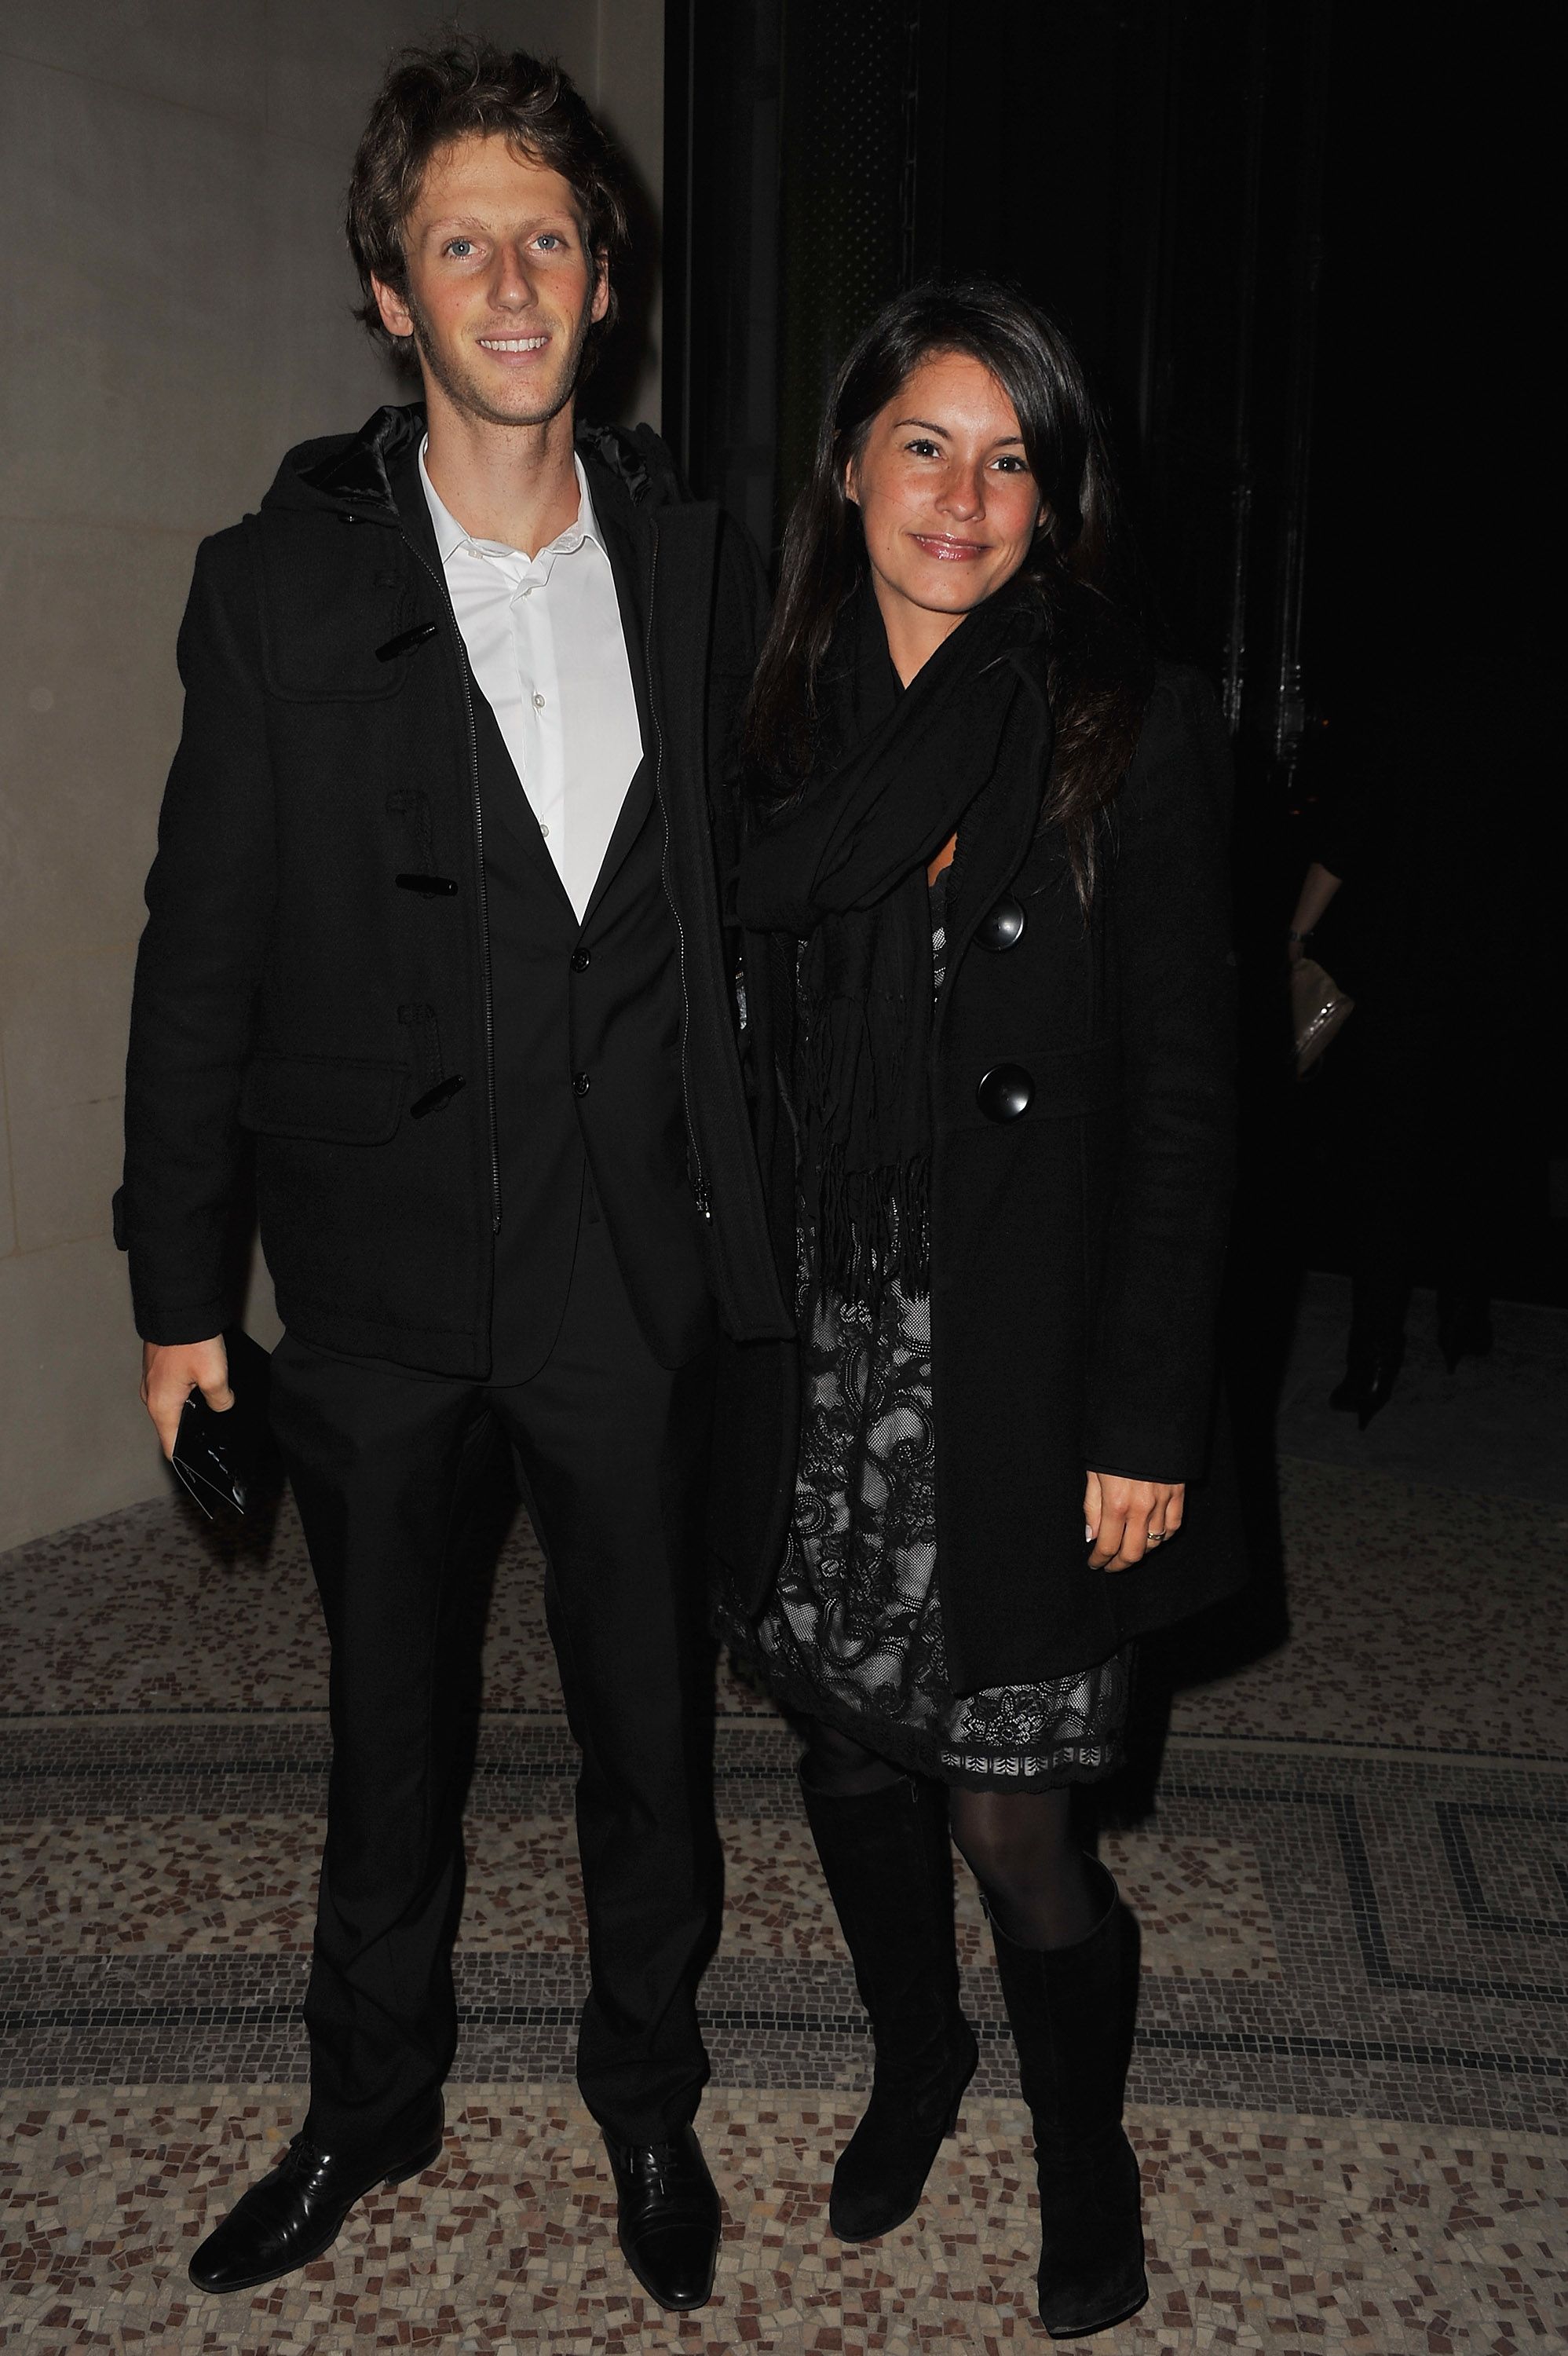 Romain Grosjean and Marion Jolles at the Pirelli Calendar launch on January 13, 2011, in Paris, France | Photo: Pascal Le Segretain/Getty Images